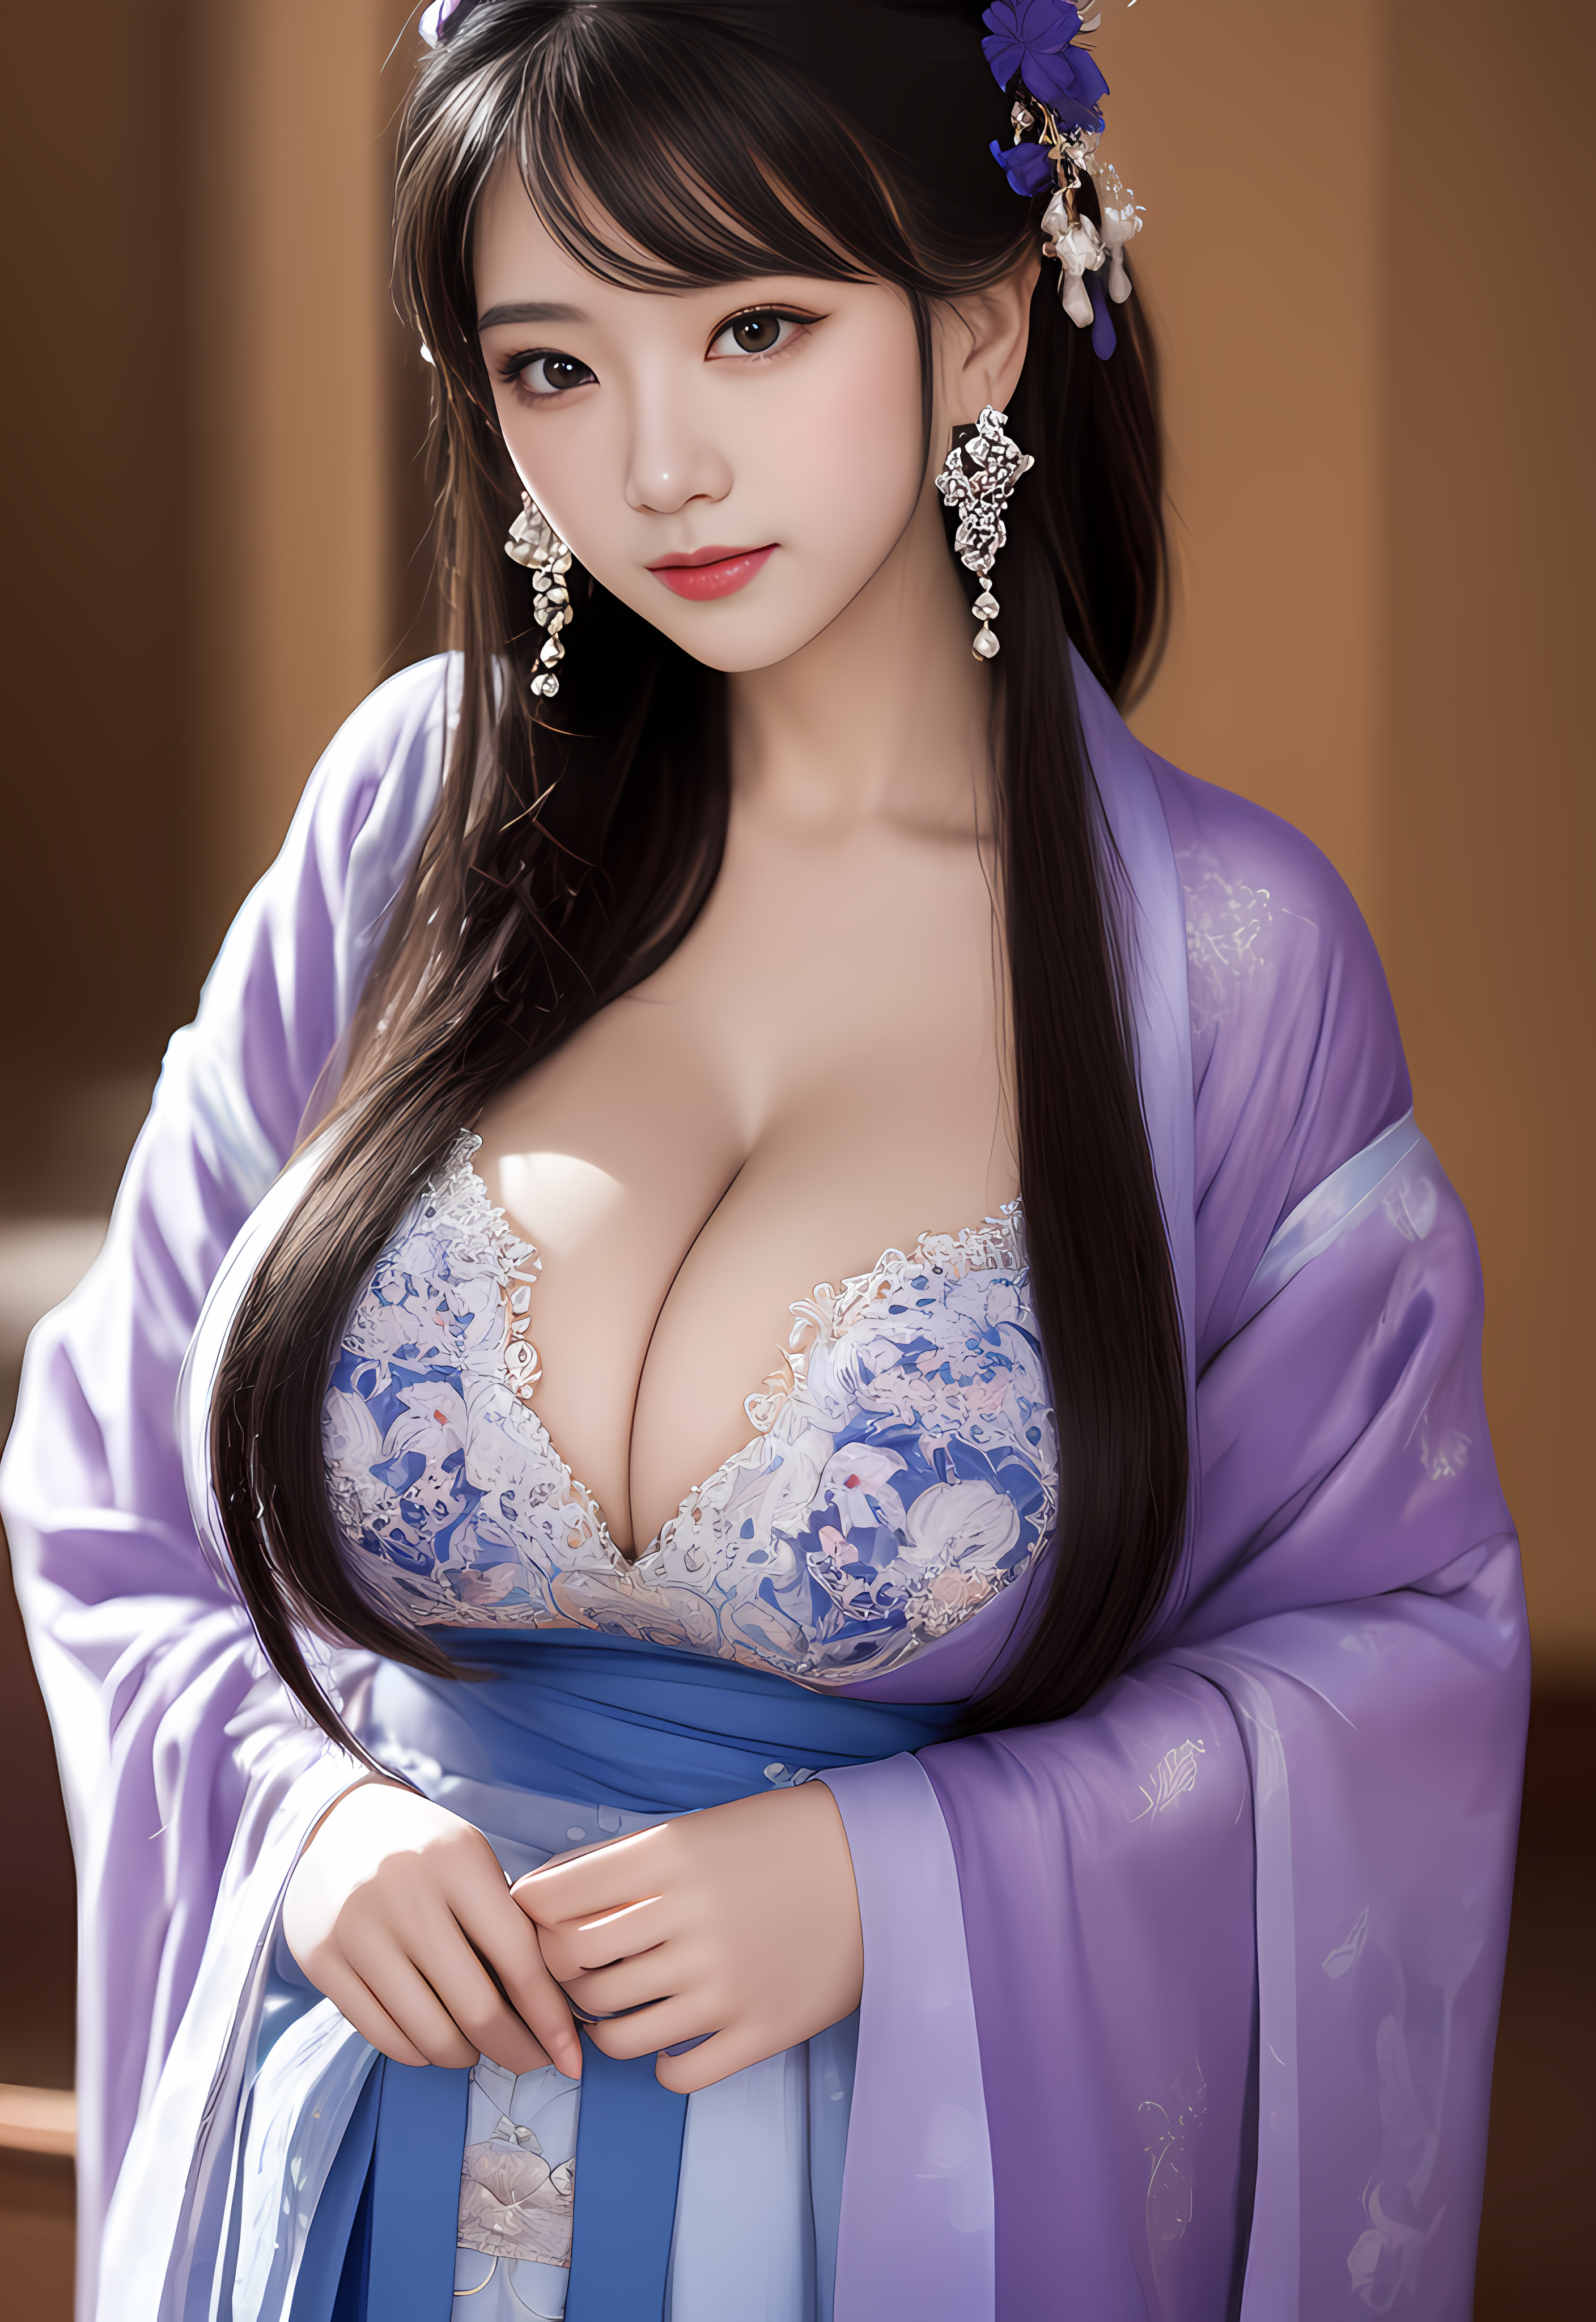 Chinese boobs pic